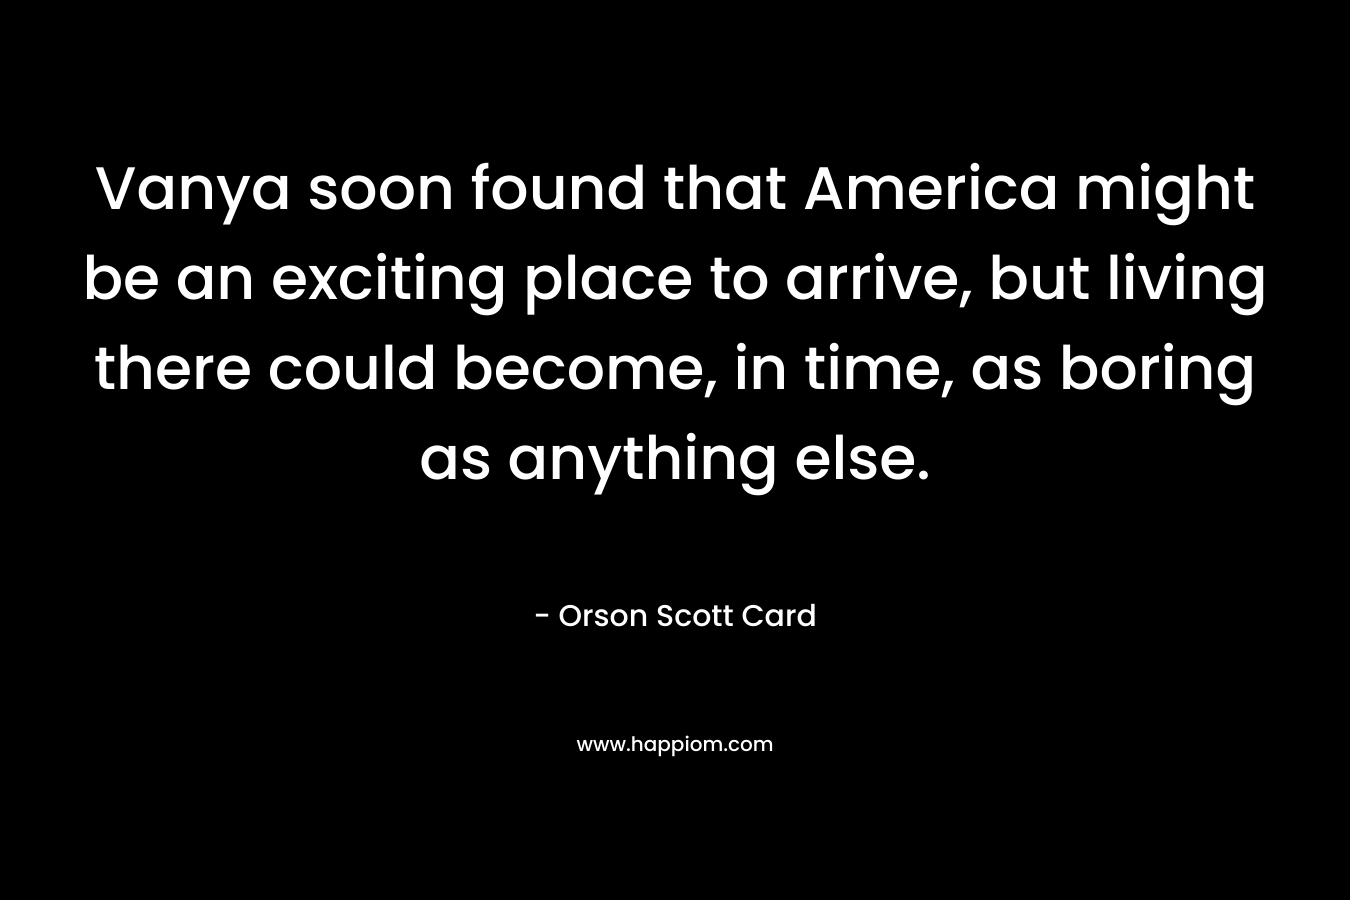 Vanya soon found that America might be an exciting place to arrive, but living there could become, in time, as boring as anything else. – Orson Scott Card